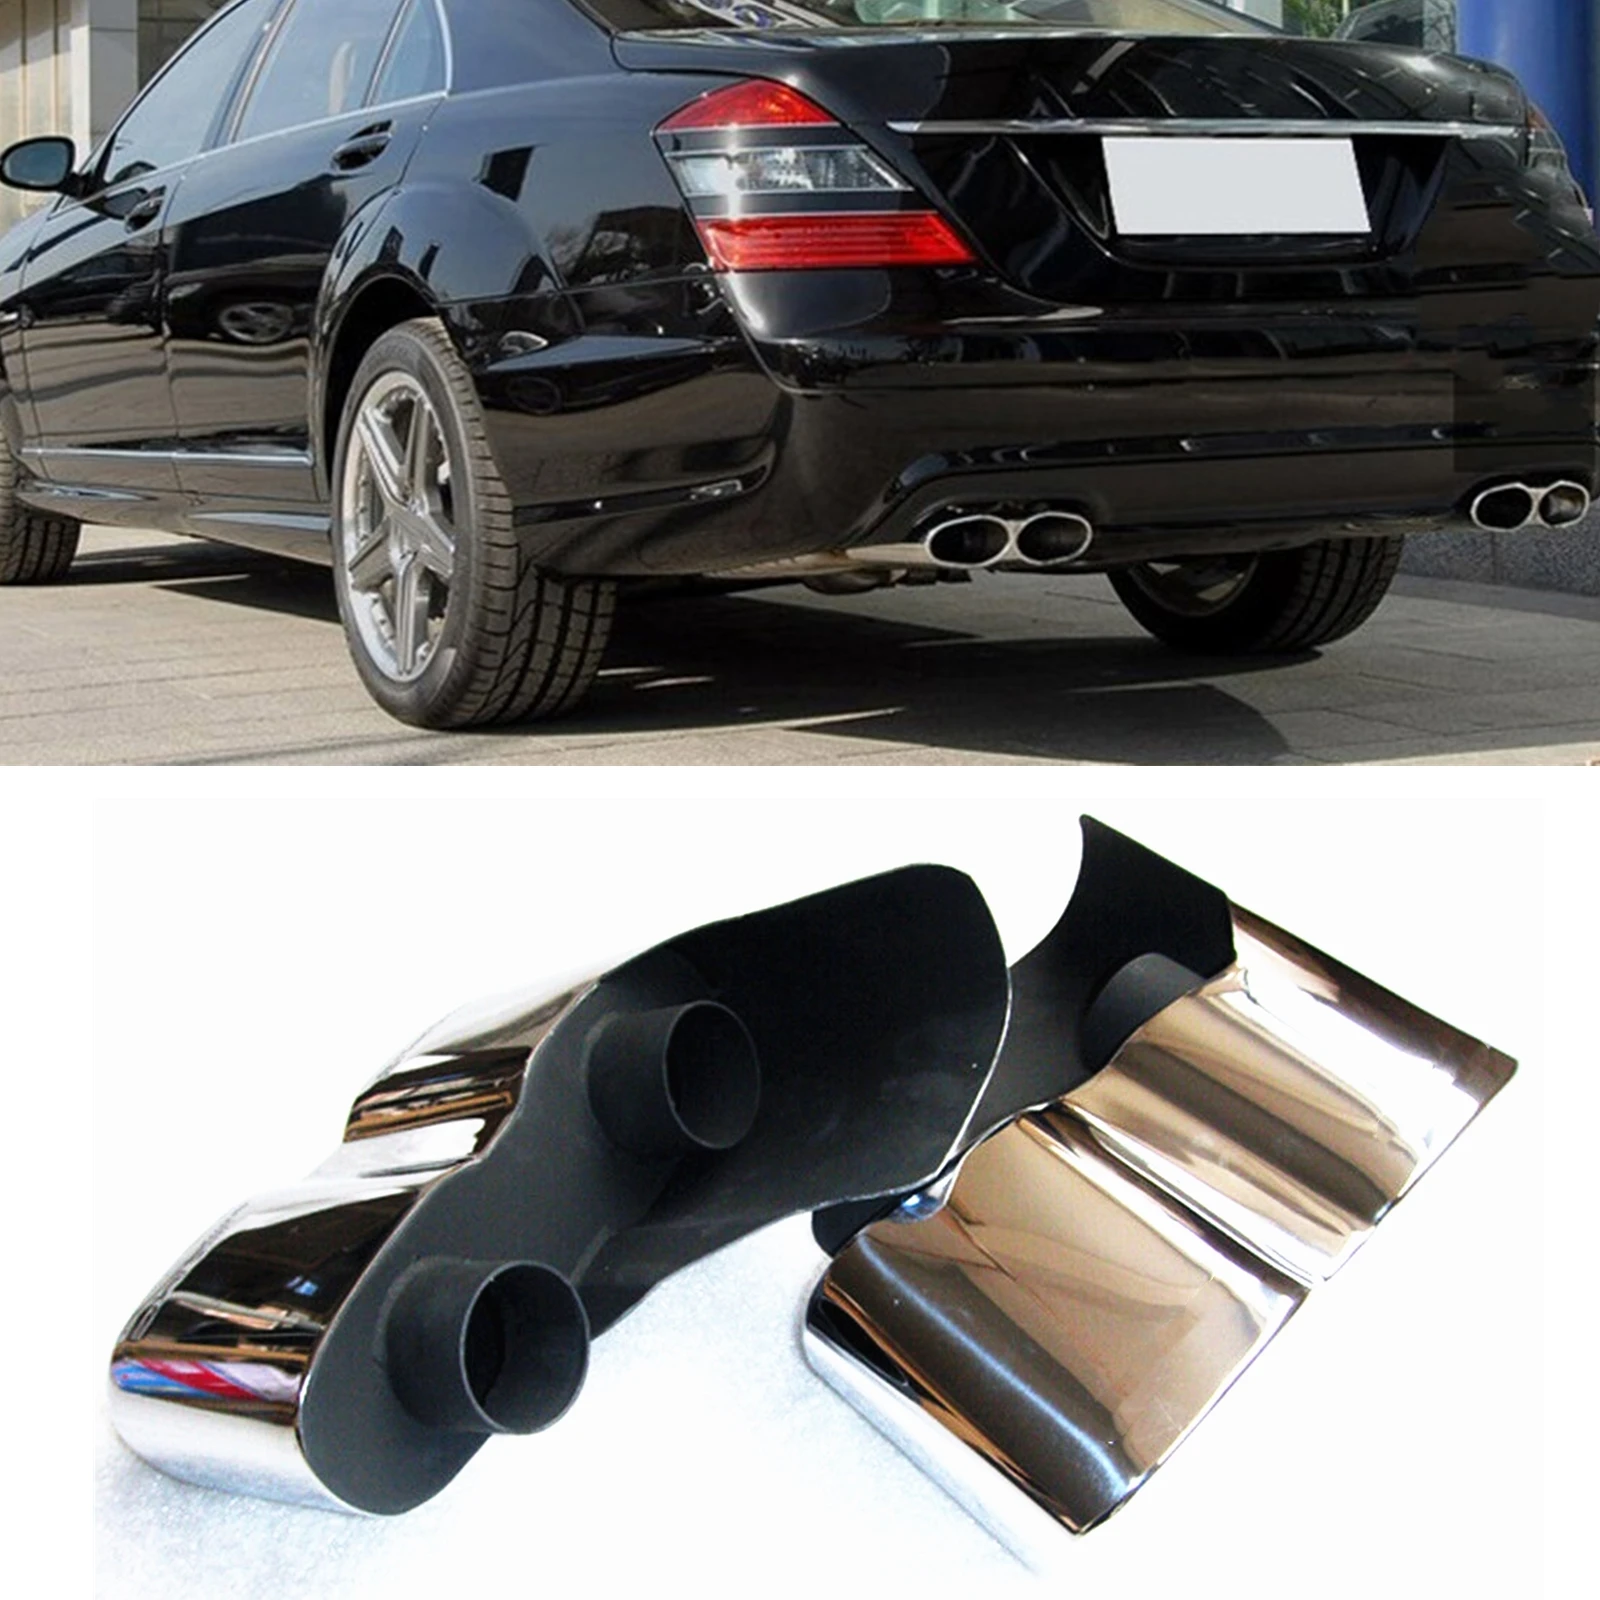 

Exhaust Muffler Tip Pipe Air Outlet Vent Duct Exhause Tailpipe For Mercedes Benz S350 S400 S500 S550 S600 AMG S63 S65 2009-2013